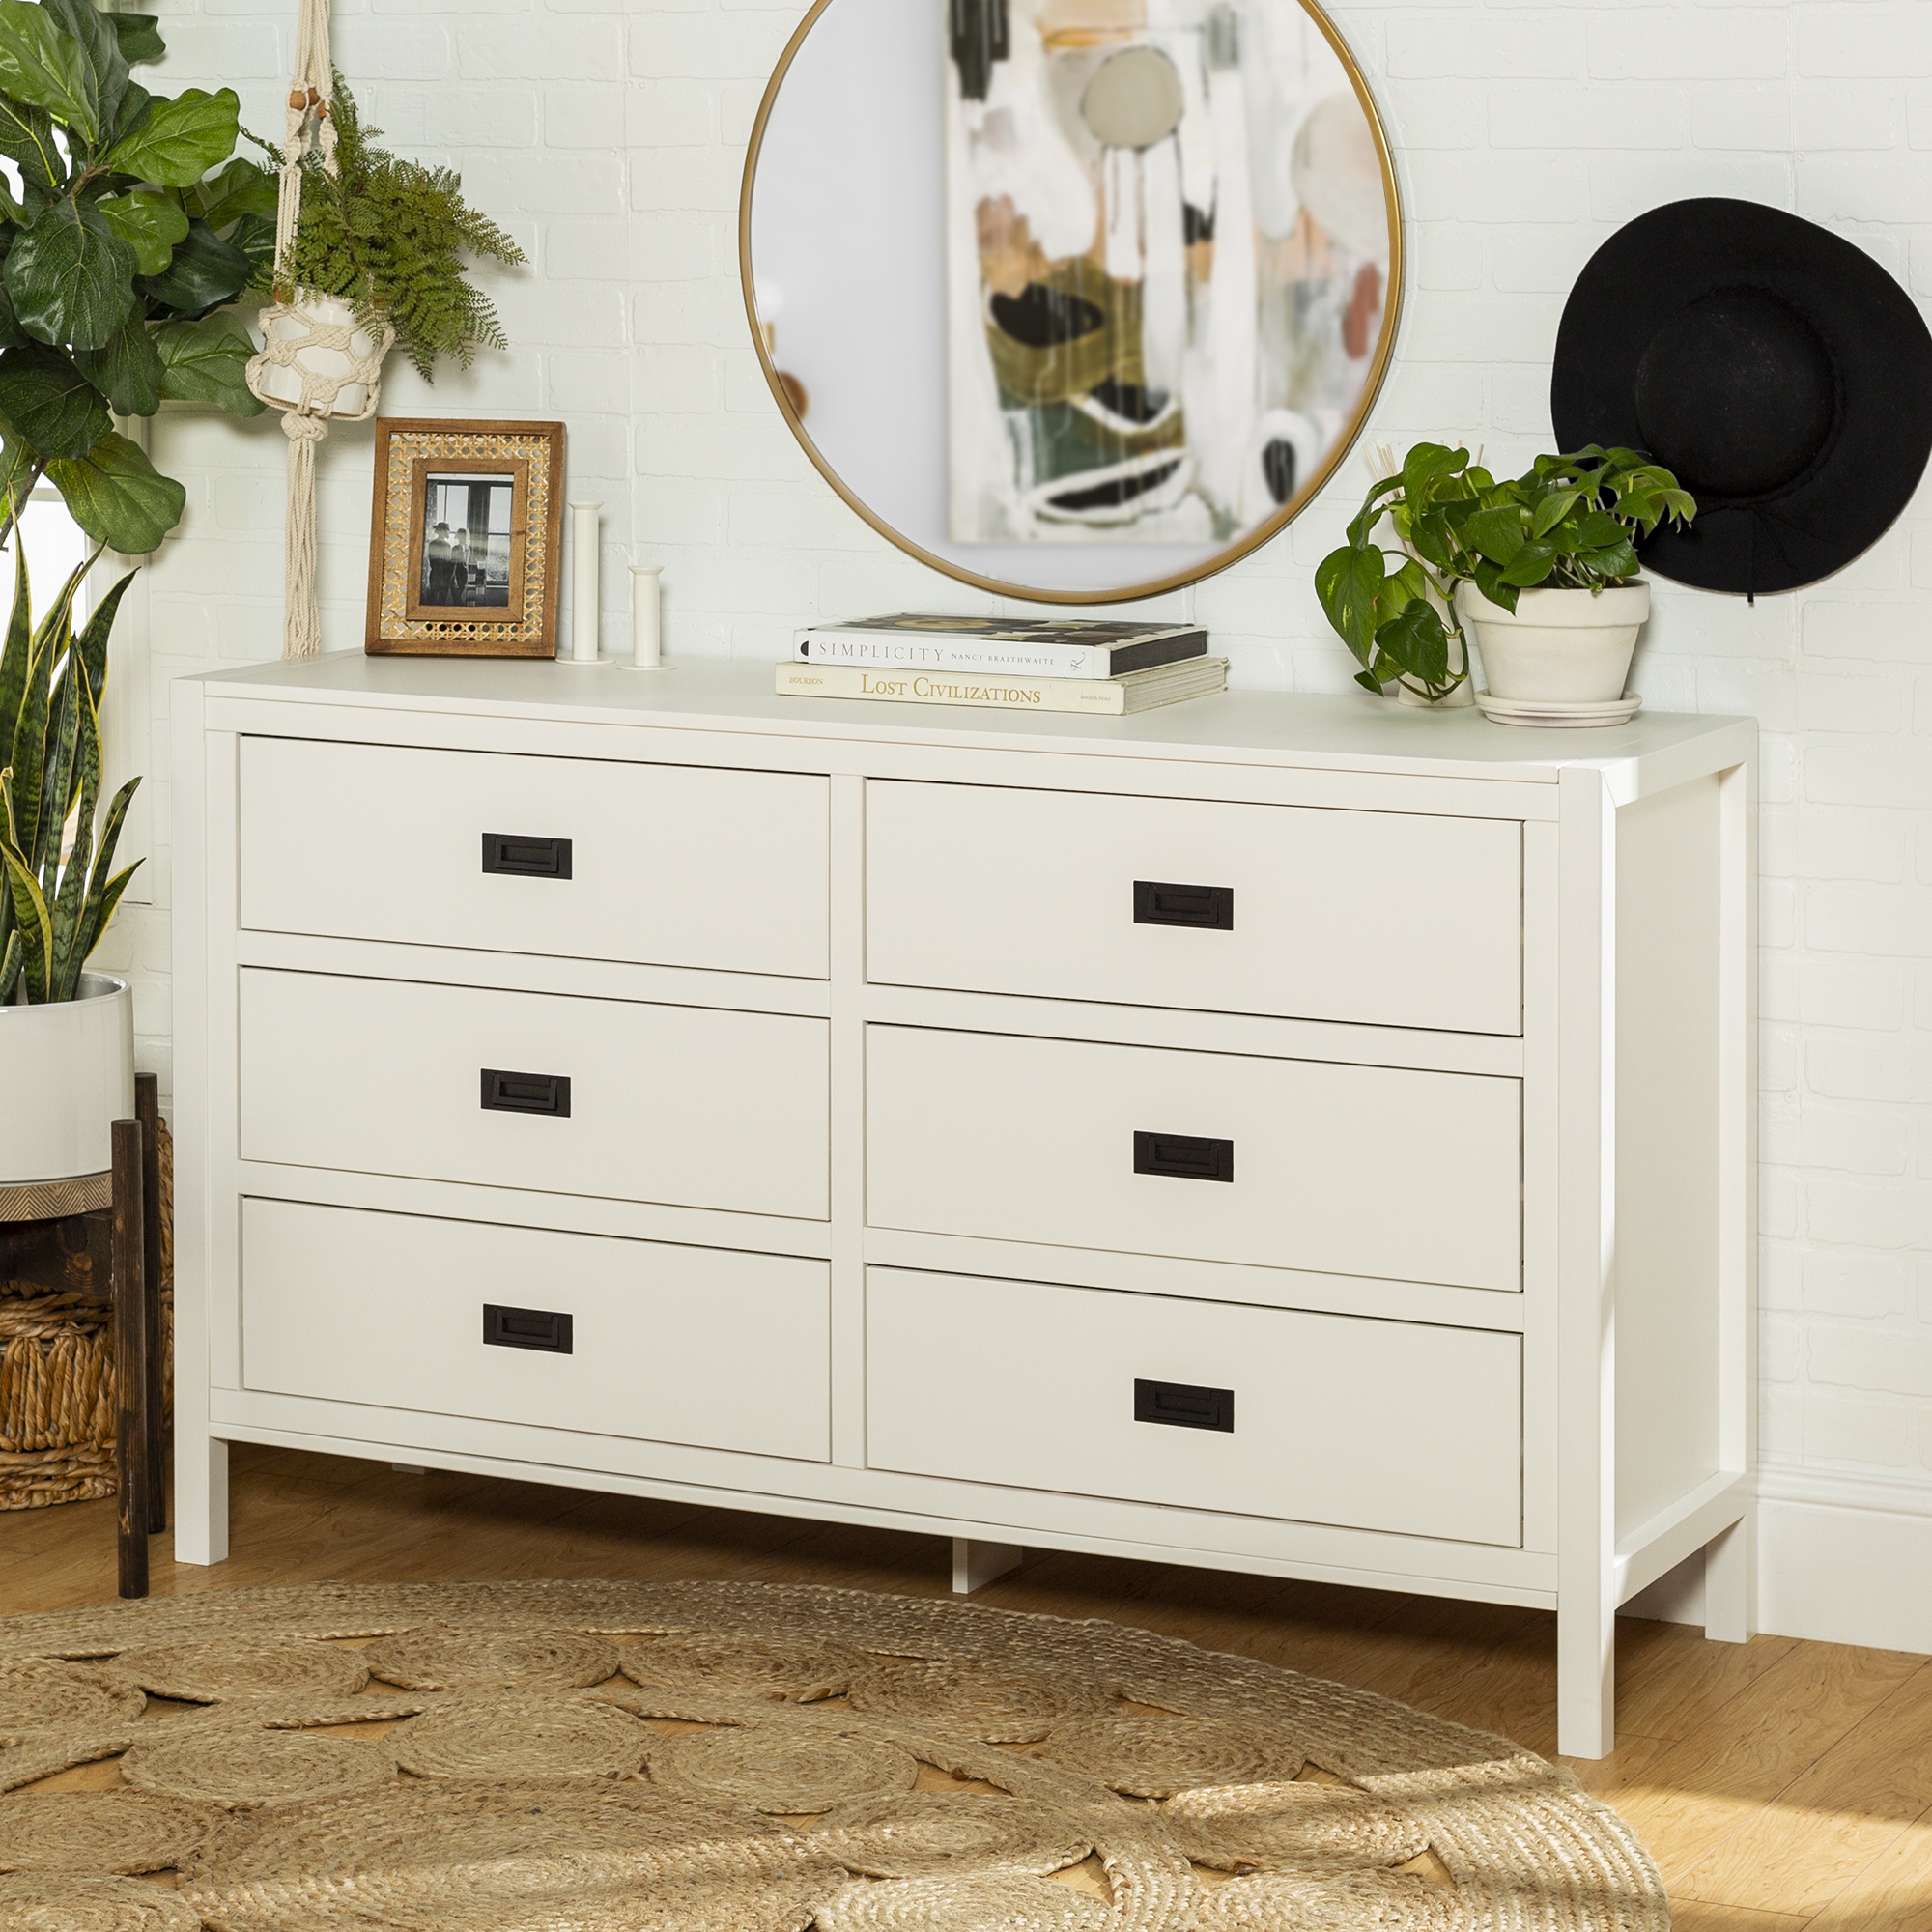 Lydia 57" Classic Solid Wood 6 Drawer Dresser - White - Image 3